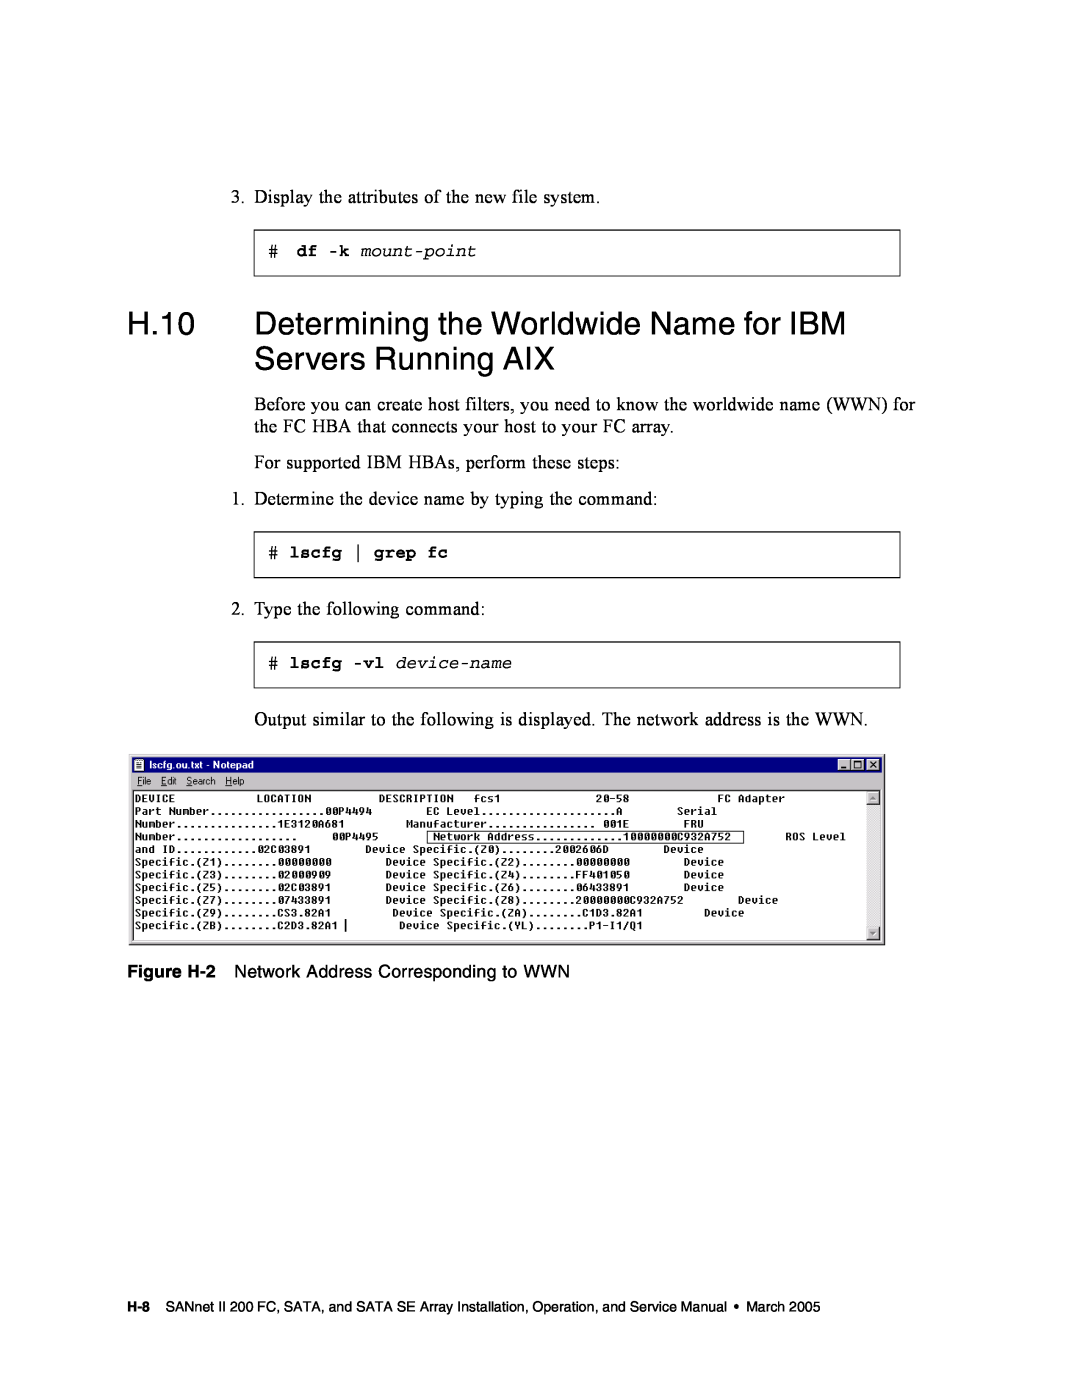 Dot Hill Systems II 200 FC service manual H.10 Determining the Worldwide Name for IBM Servers Running AIX, # lscfg grep fc 